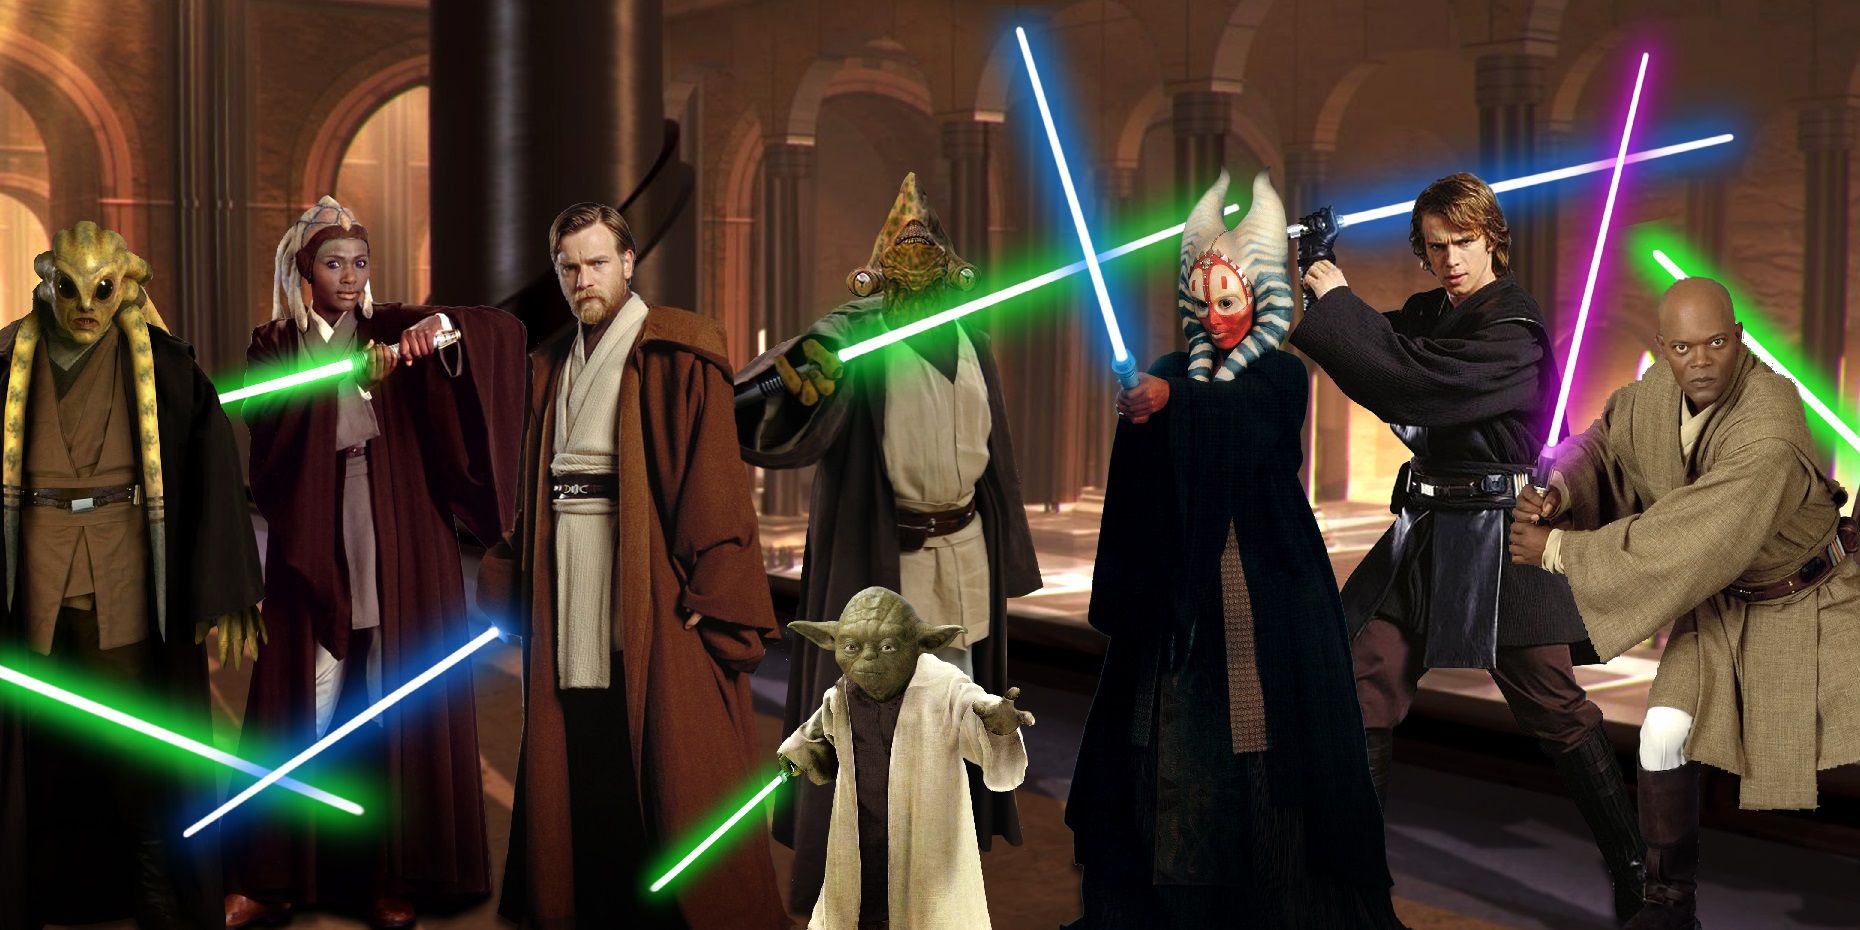 The Jedi Order from Star Wars.